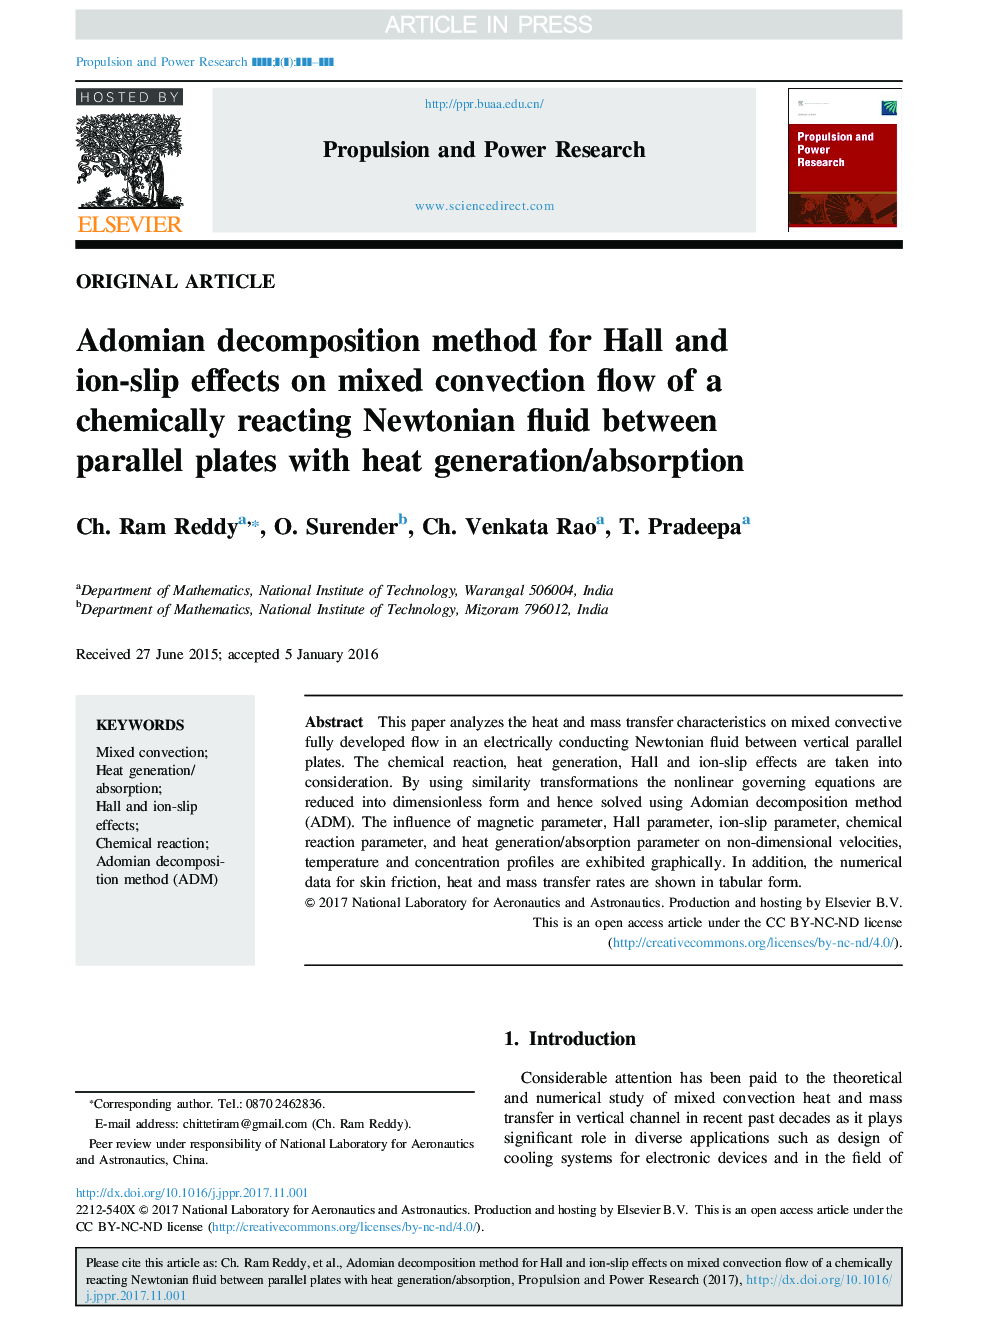 Adomian decomposition method for Hall and ion-slip effects on mixed convection flow of a chemically reacting Newtonian fluid between parallel plates with heat generation/absorption